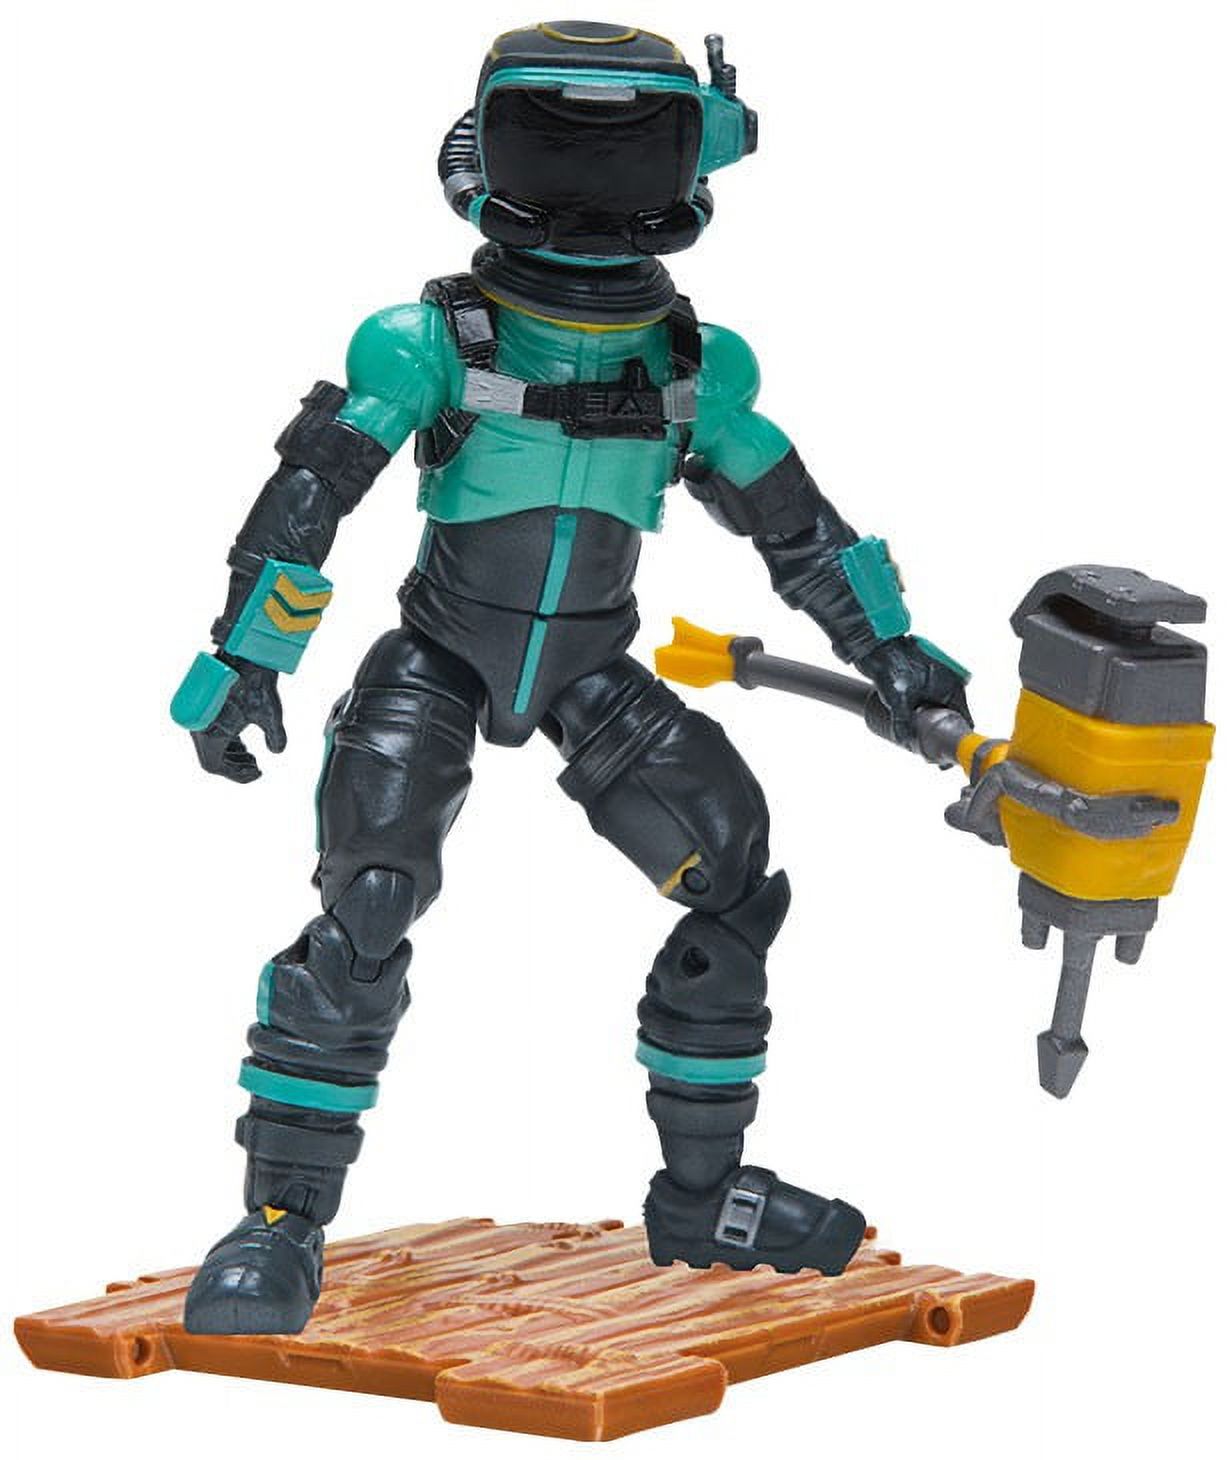 Fortnite Solo Mode Core Figure Pack, Toxic Trooper - image 2 of 3